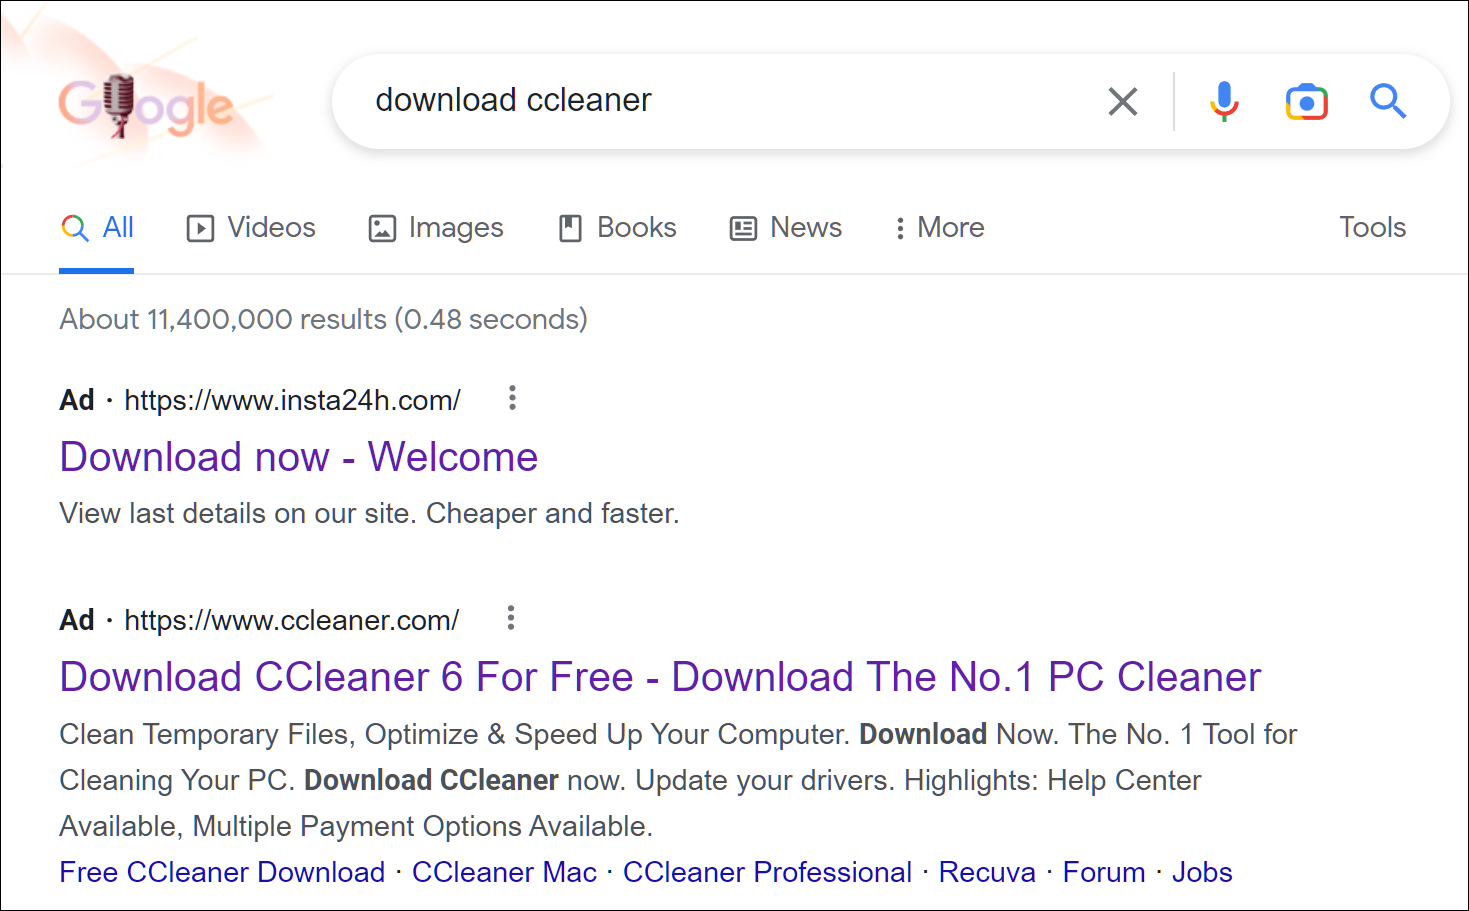 CCleaner malicious download pushed via ads in Google search results